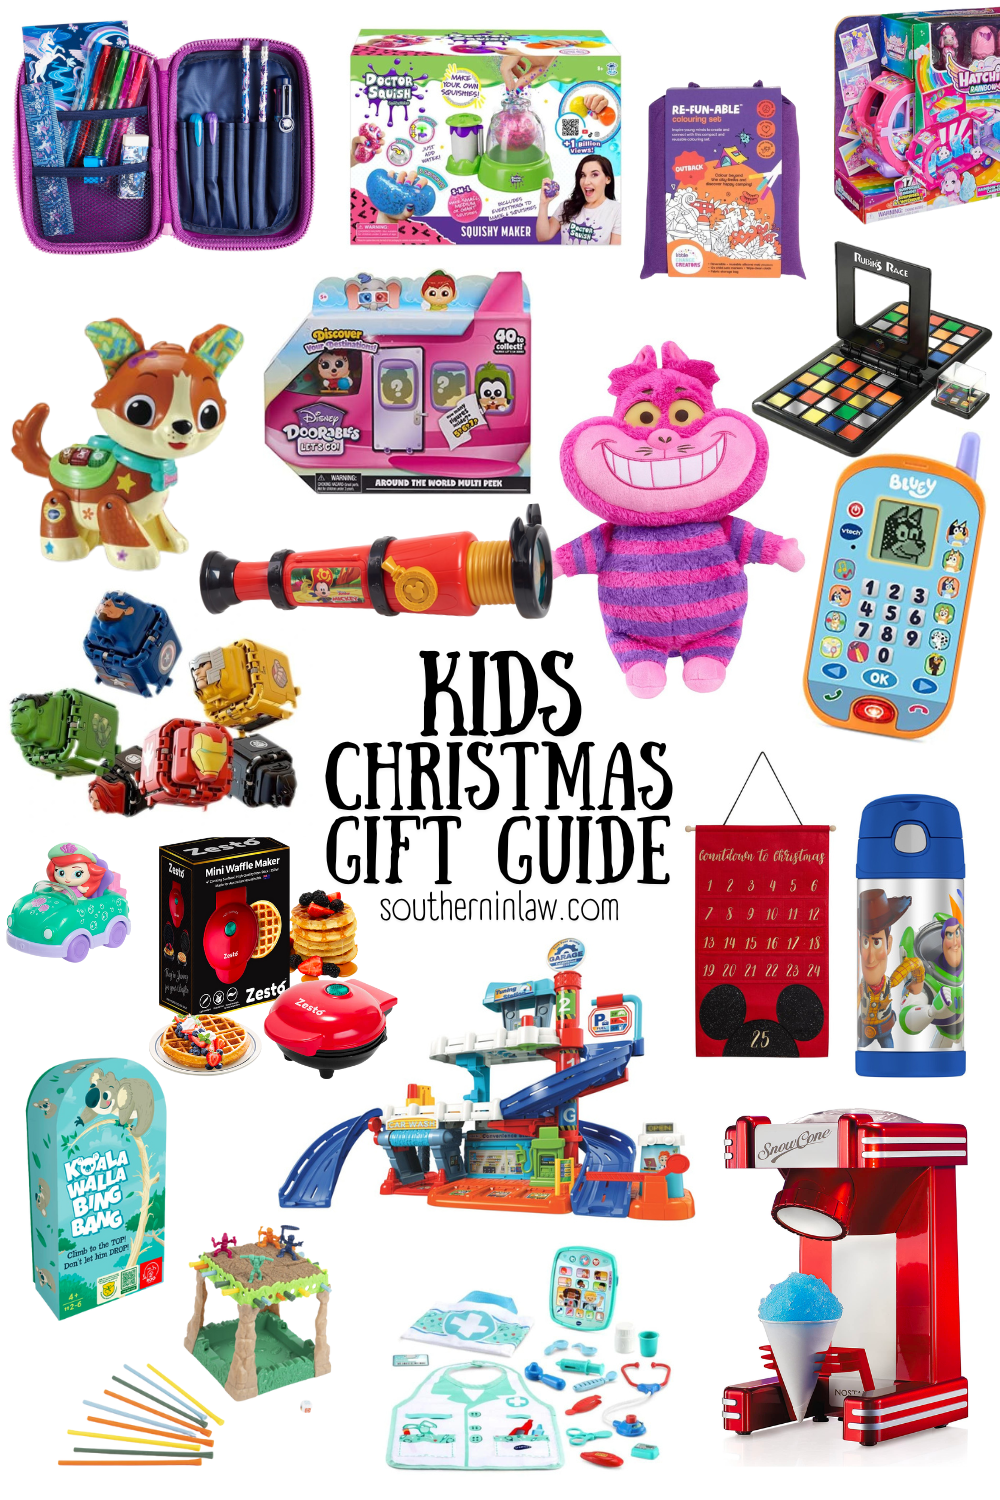 Gifts For Girls 7 - 12 with Ideas for Toys & Presents at Gifts Australia